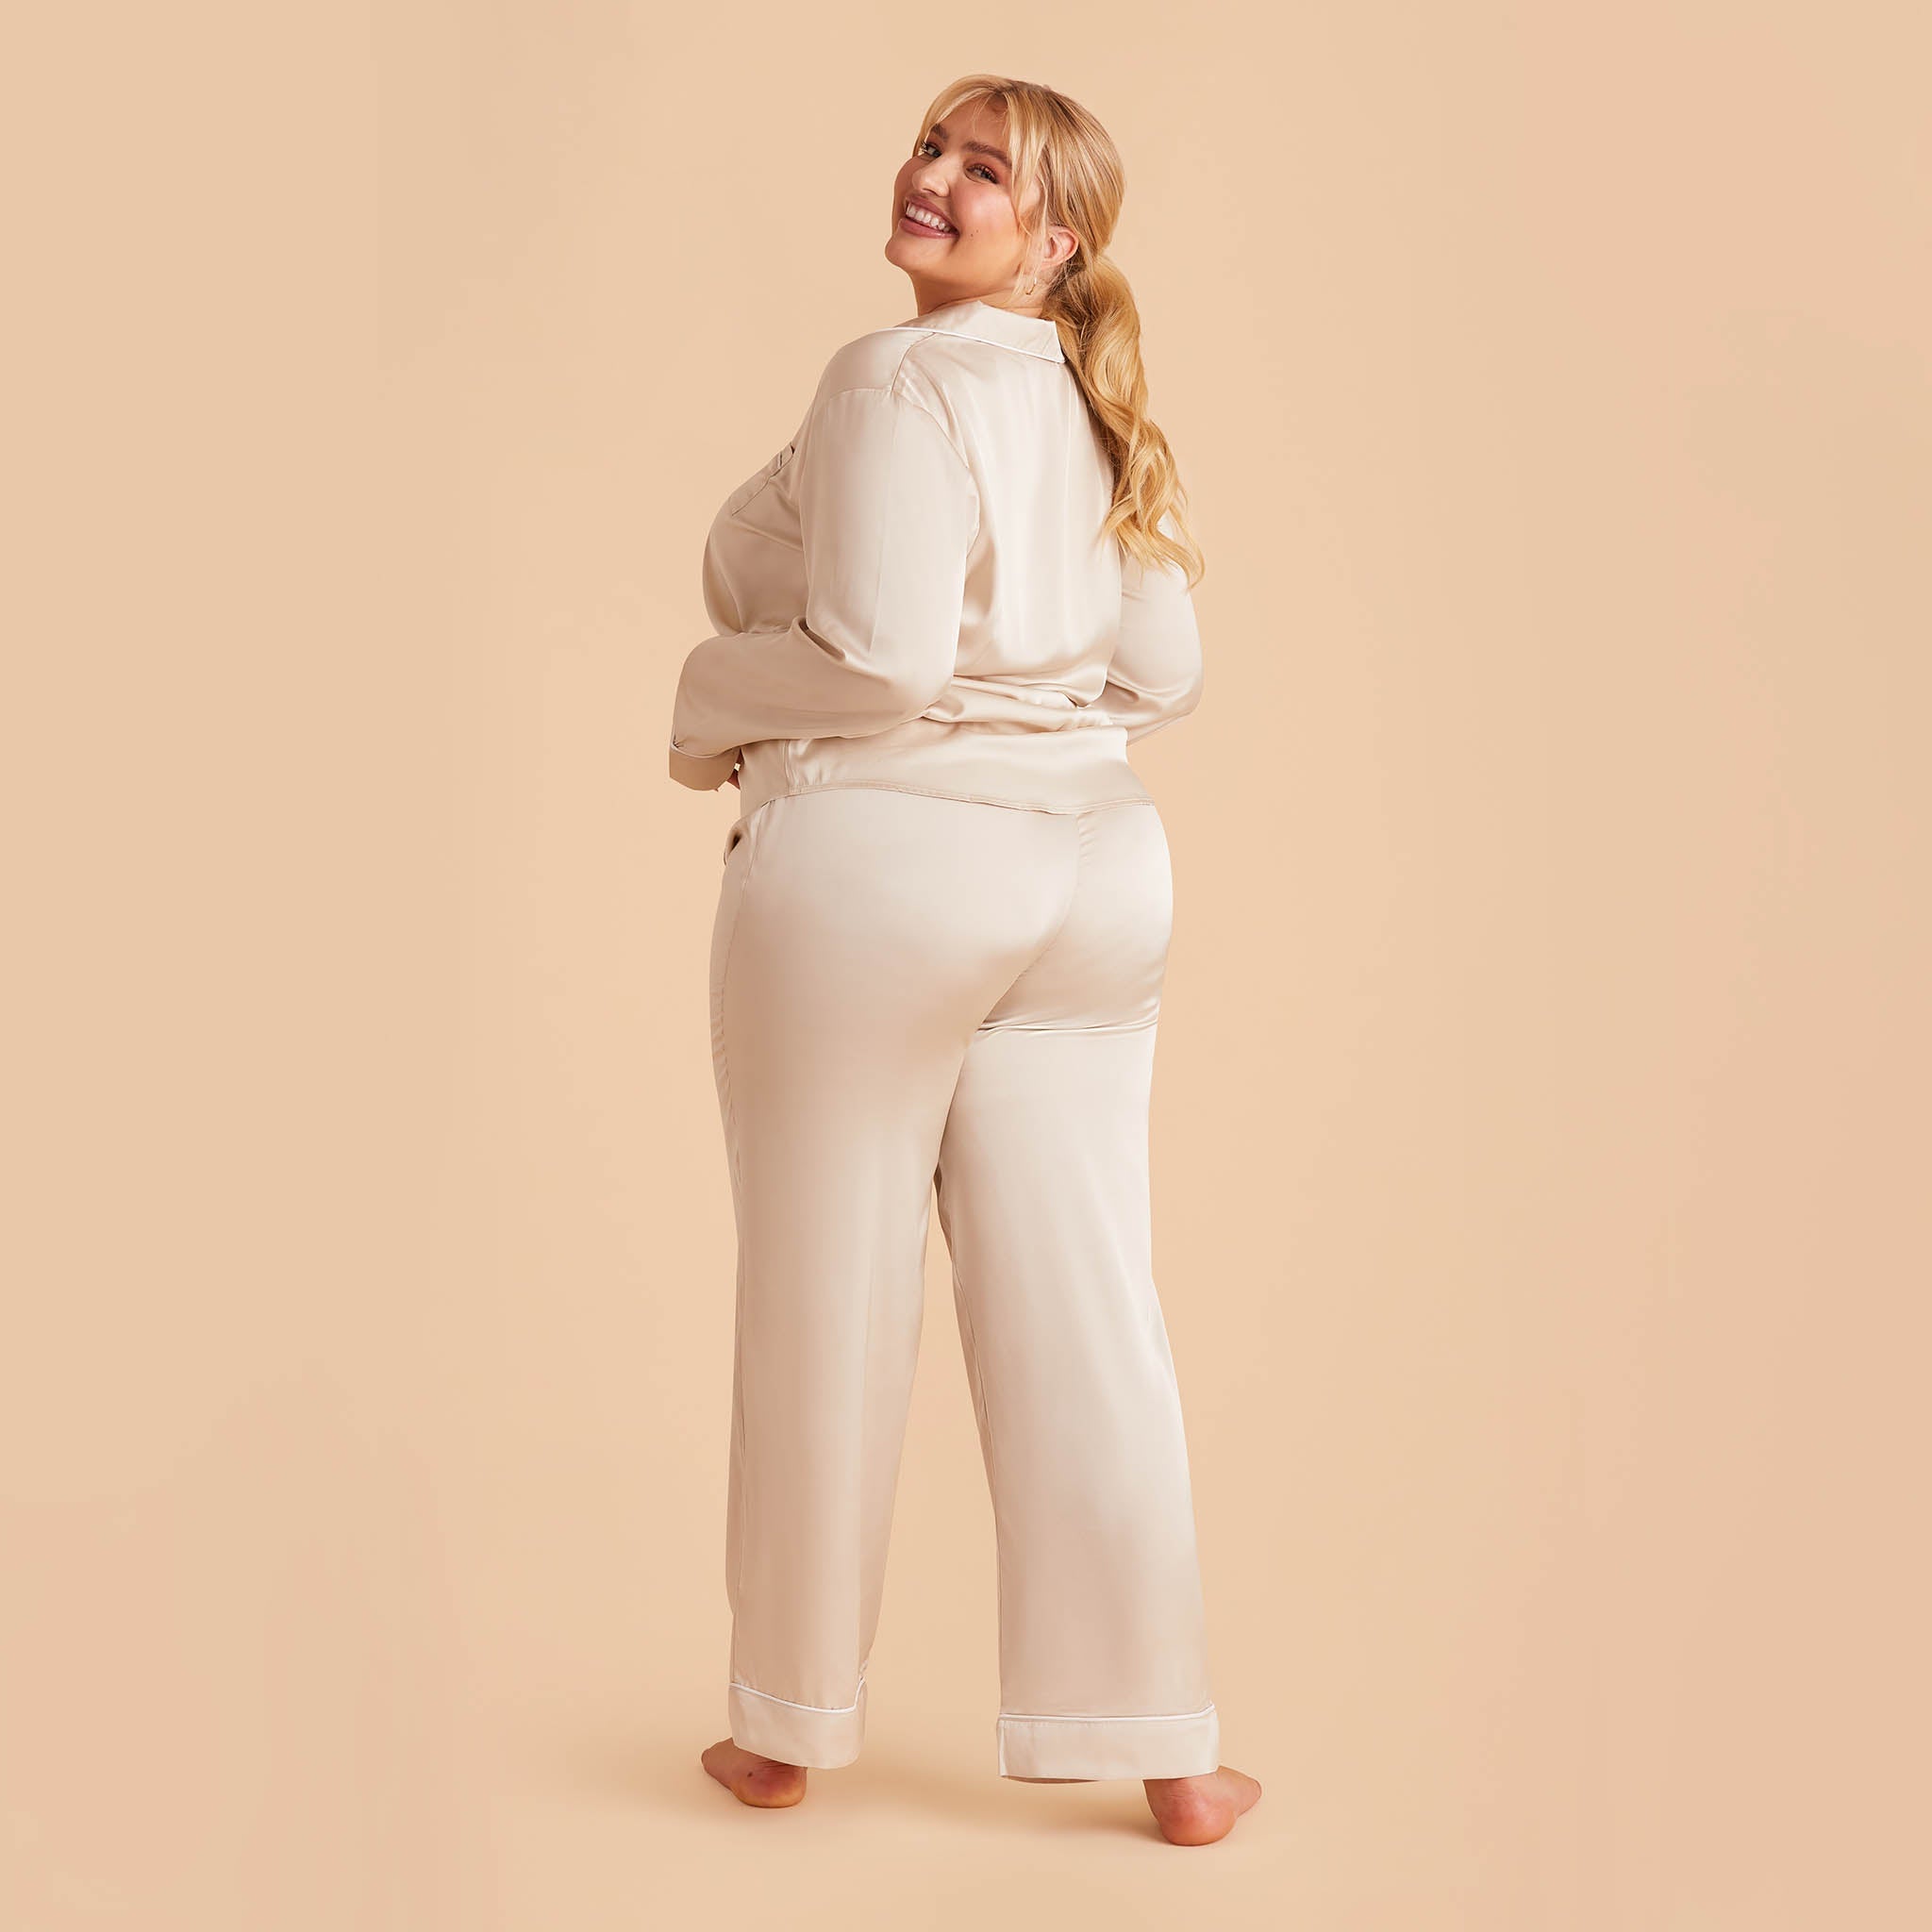 Jonny Plus Size Satin Long Sleeve Pajama Top With White Piping in champagne, back view